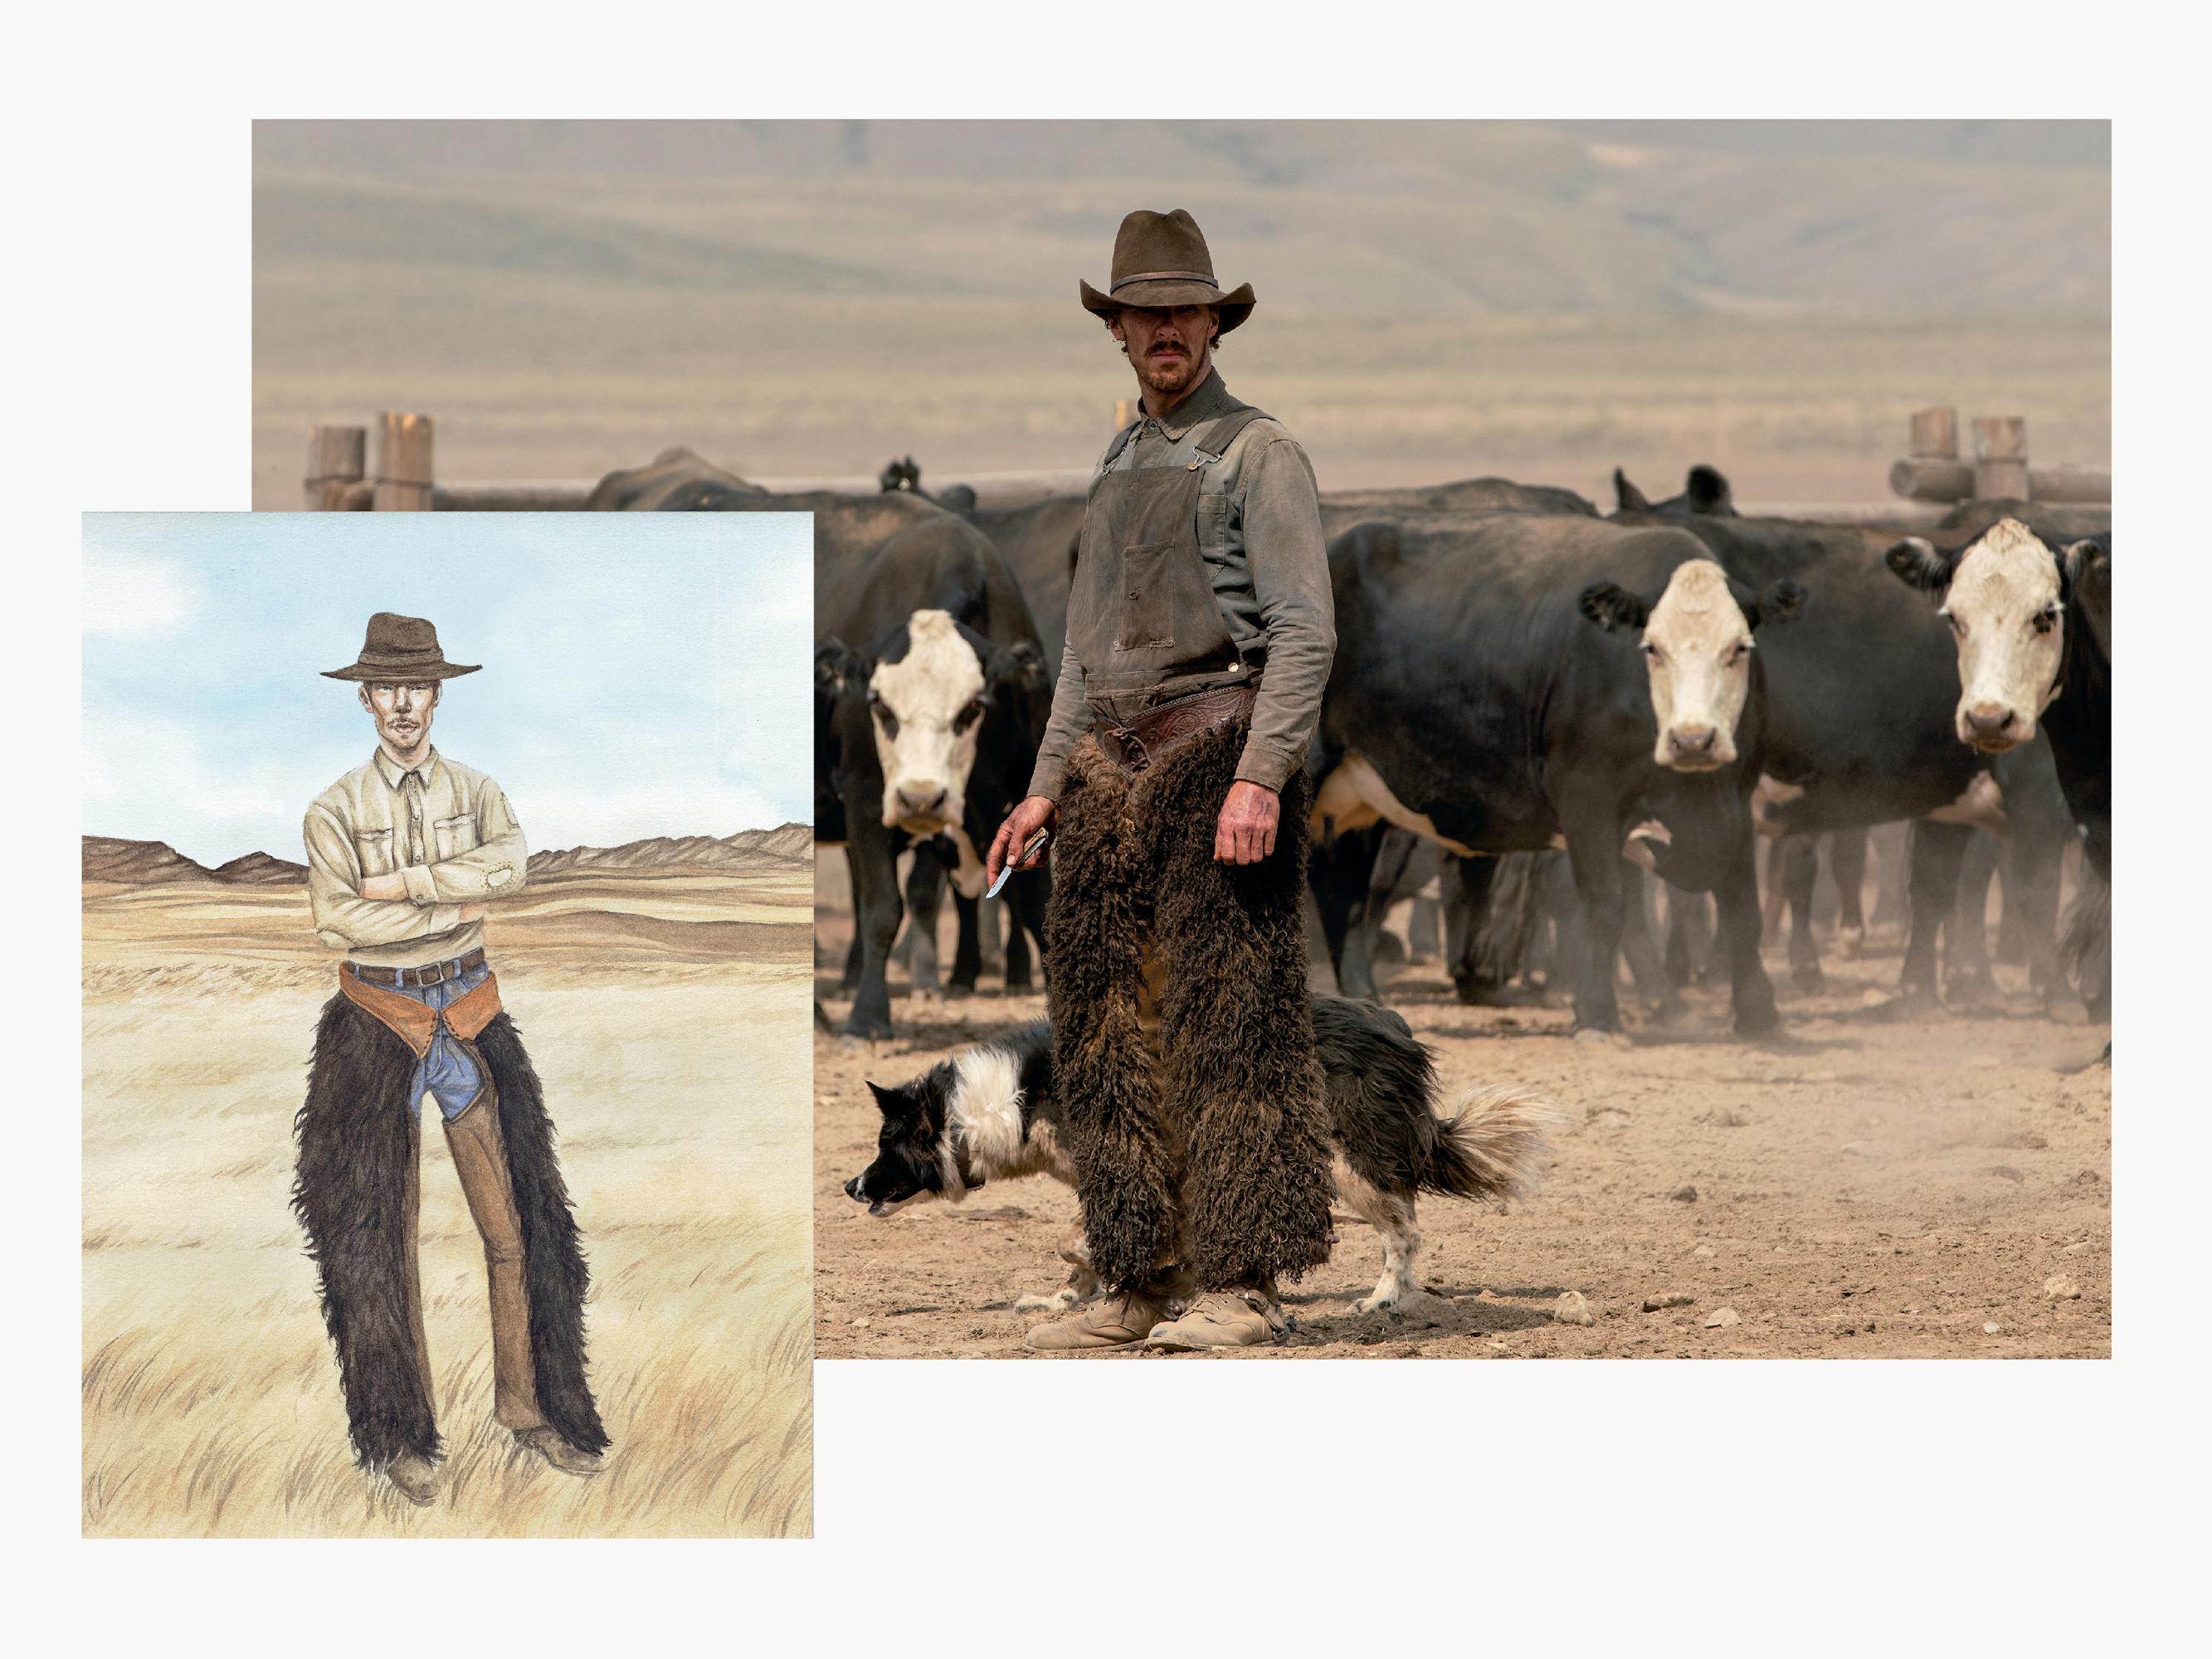 Benedict Cumberbatch wears furry chaps and a wide brimmed hat and stands in front of cows. To the left of the image is a small sketch with the same outfit.